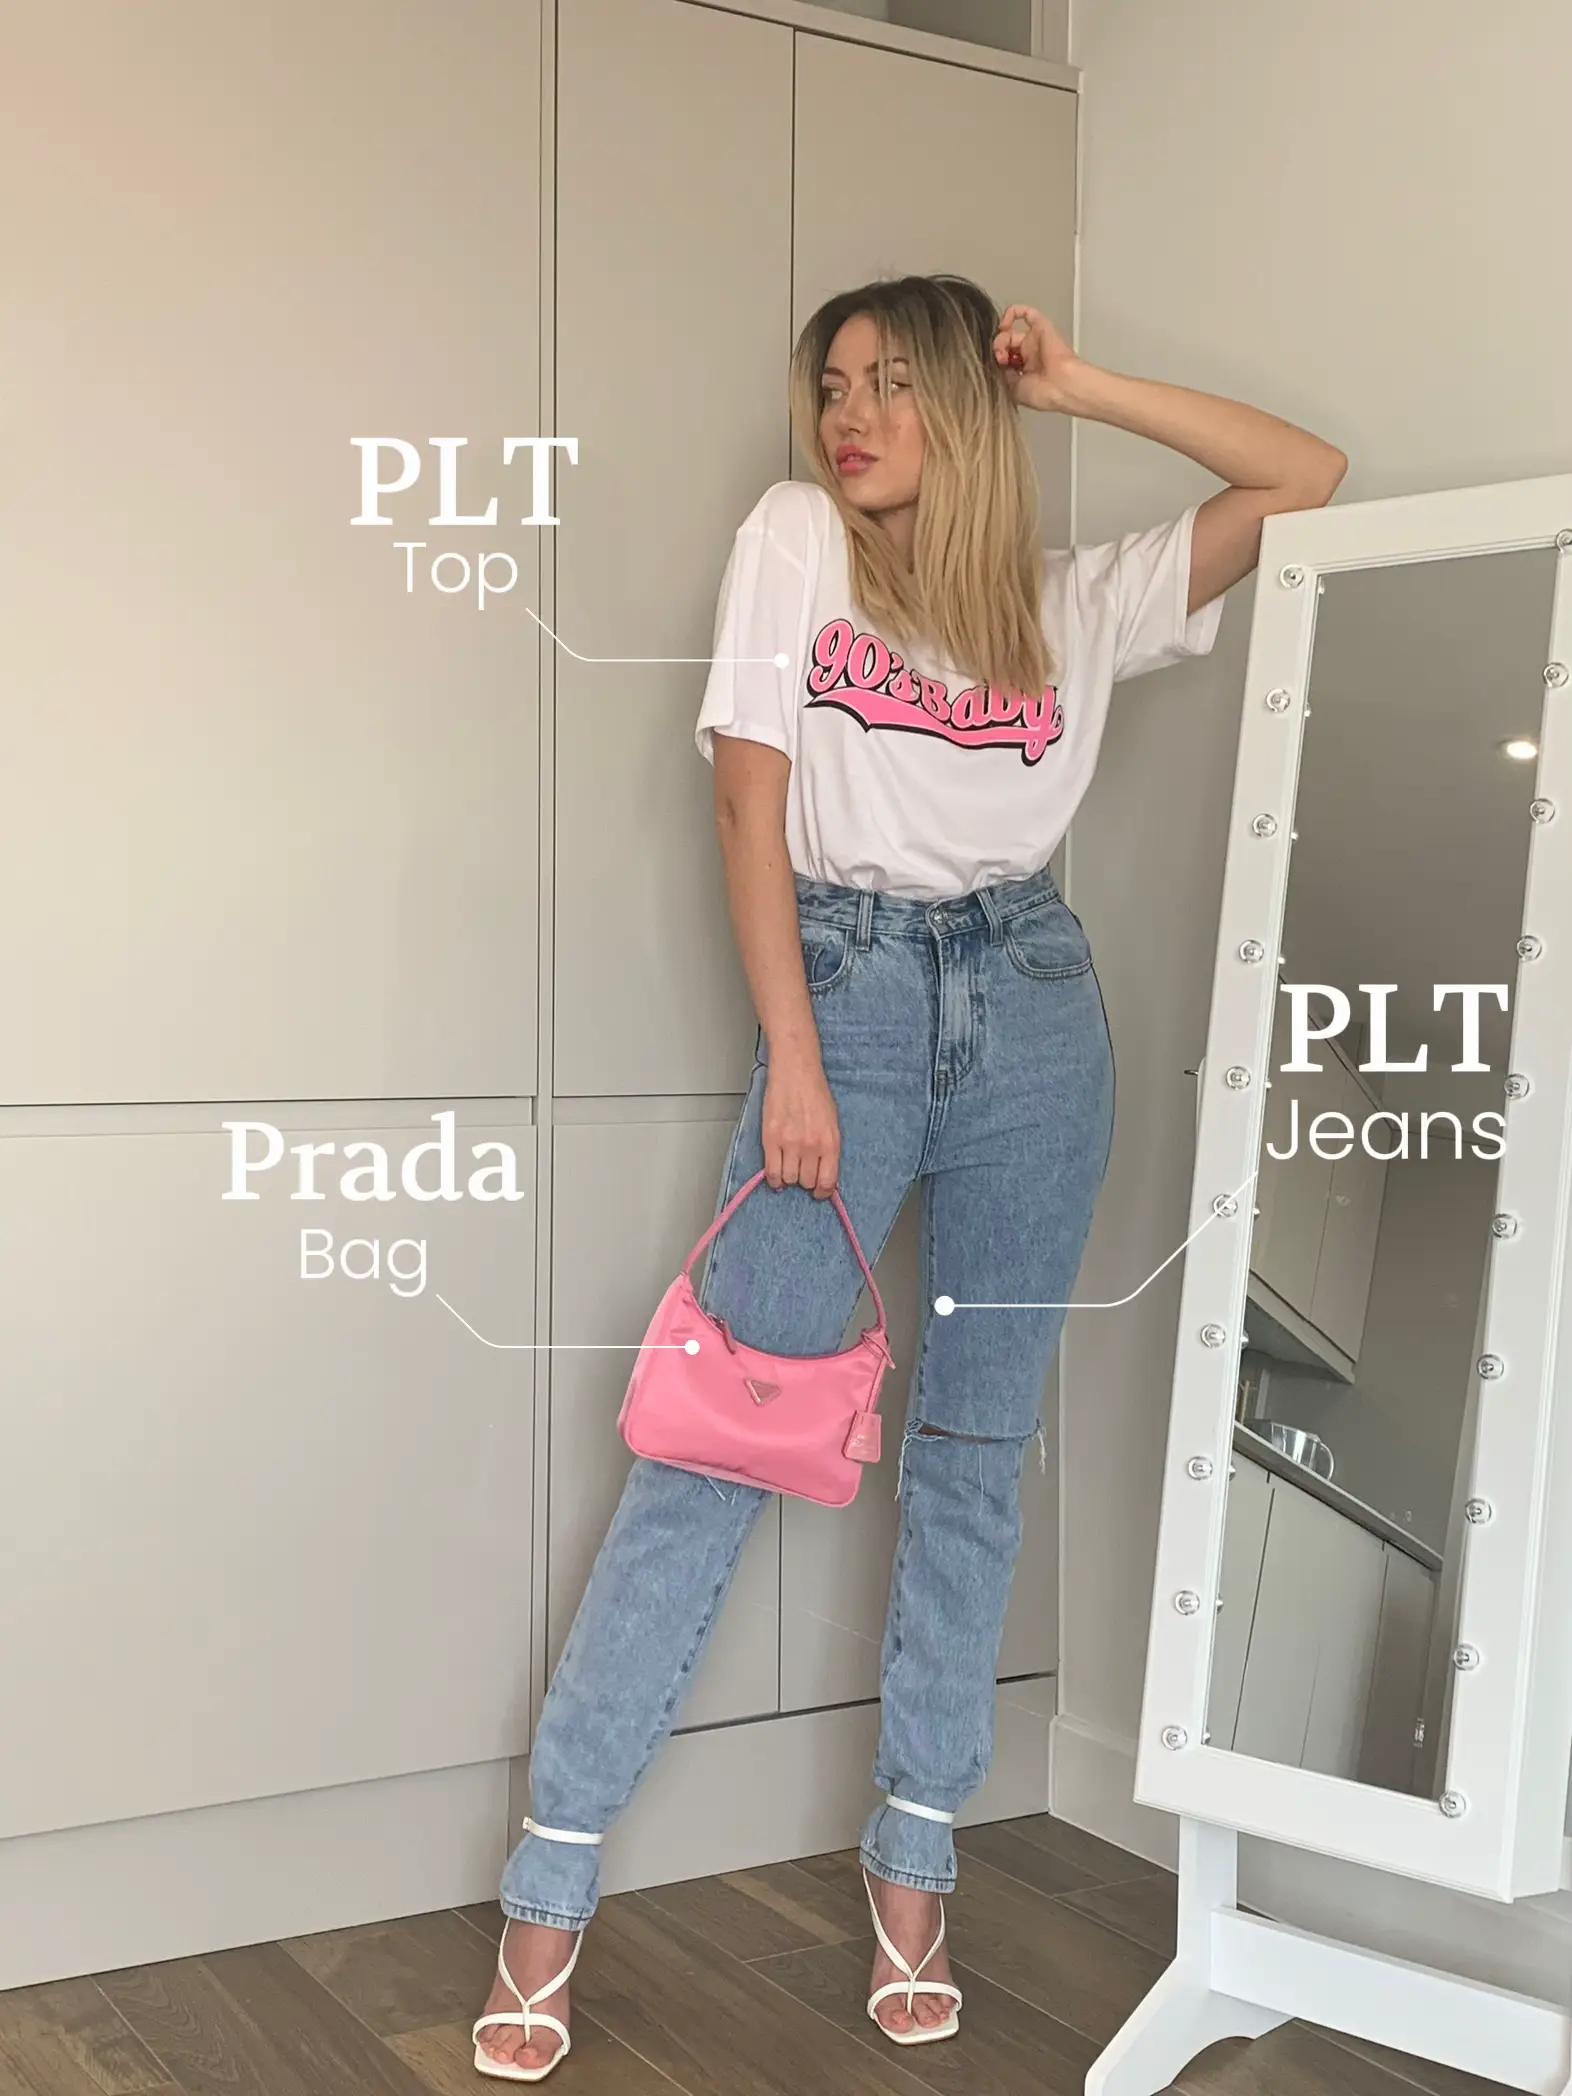 Pink Suit Outfit Ideas